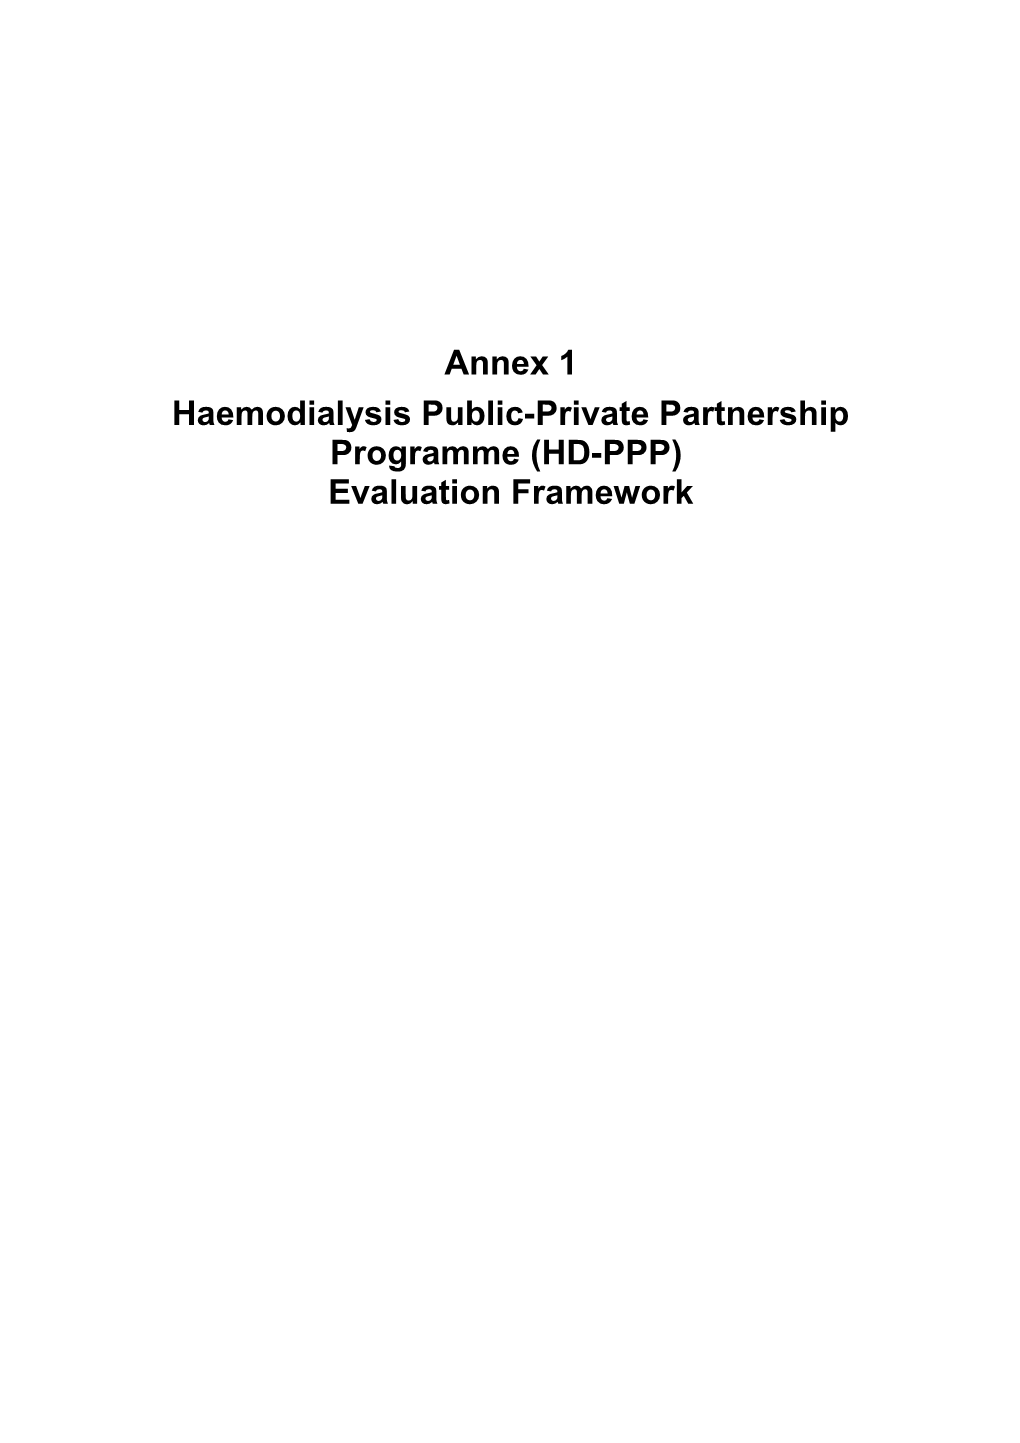 Haemodialysis Public-Private Partnership Programme (HD-PPP)